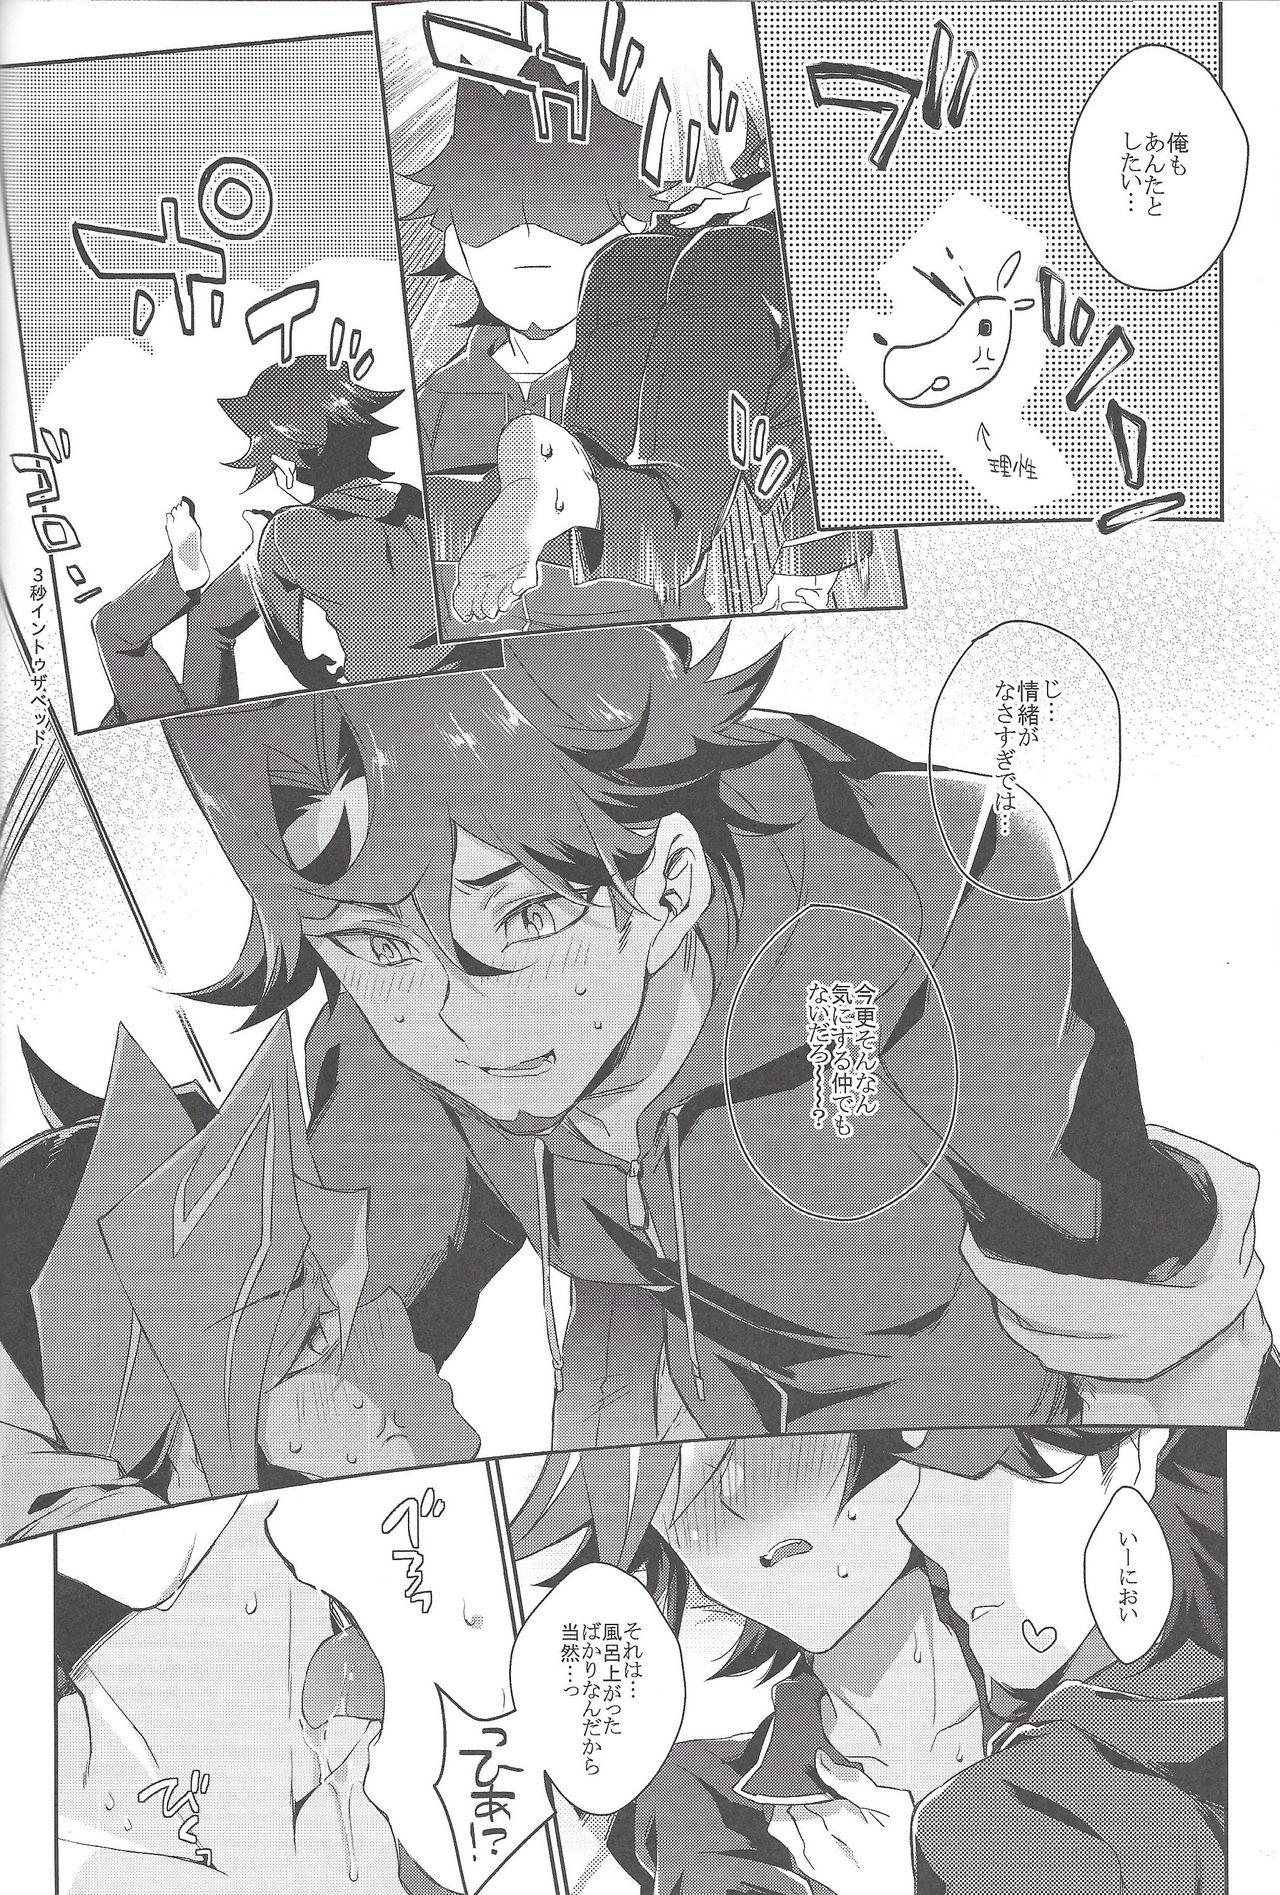 Rough Porn LOVE LINK - Yu gi oh vrains Bucetinha - Page 7